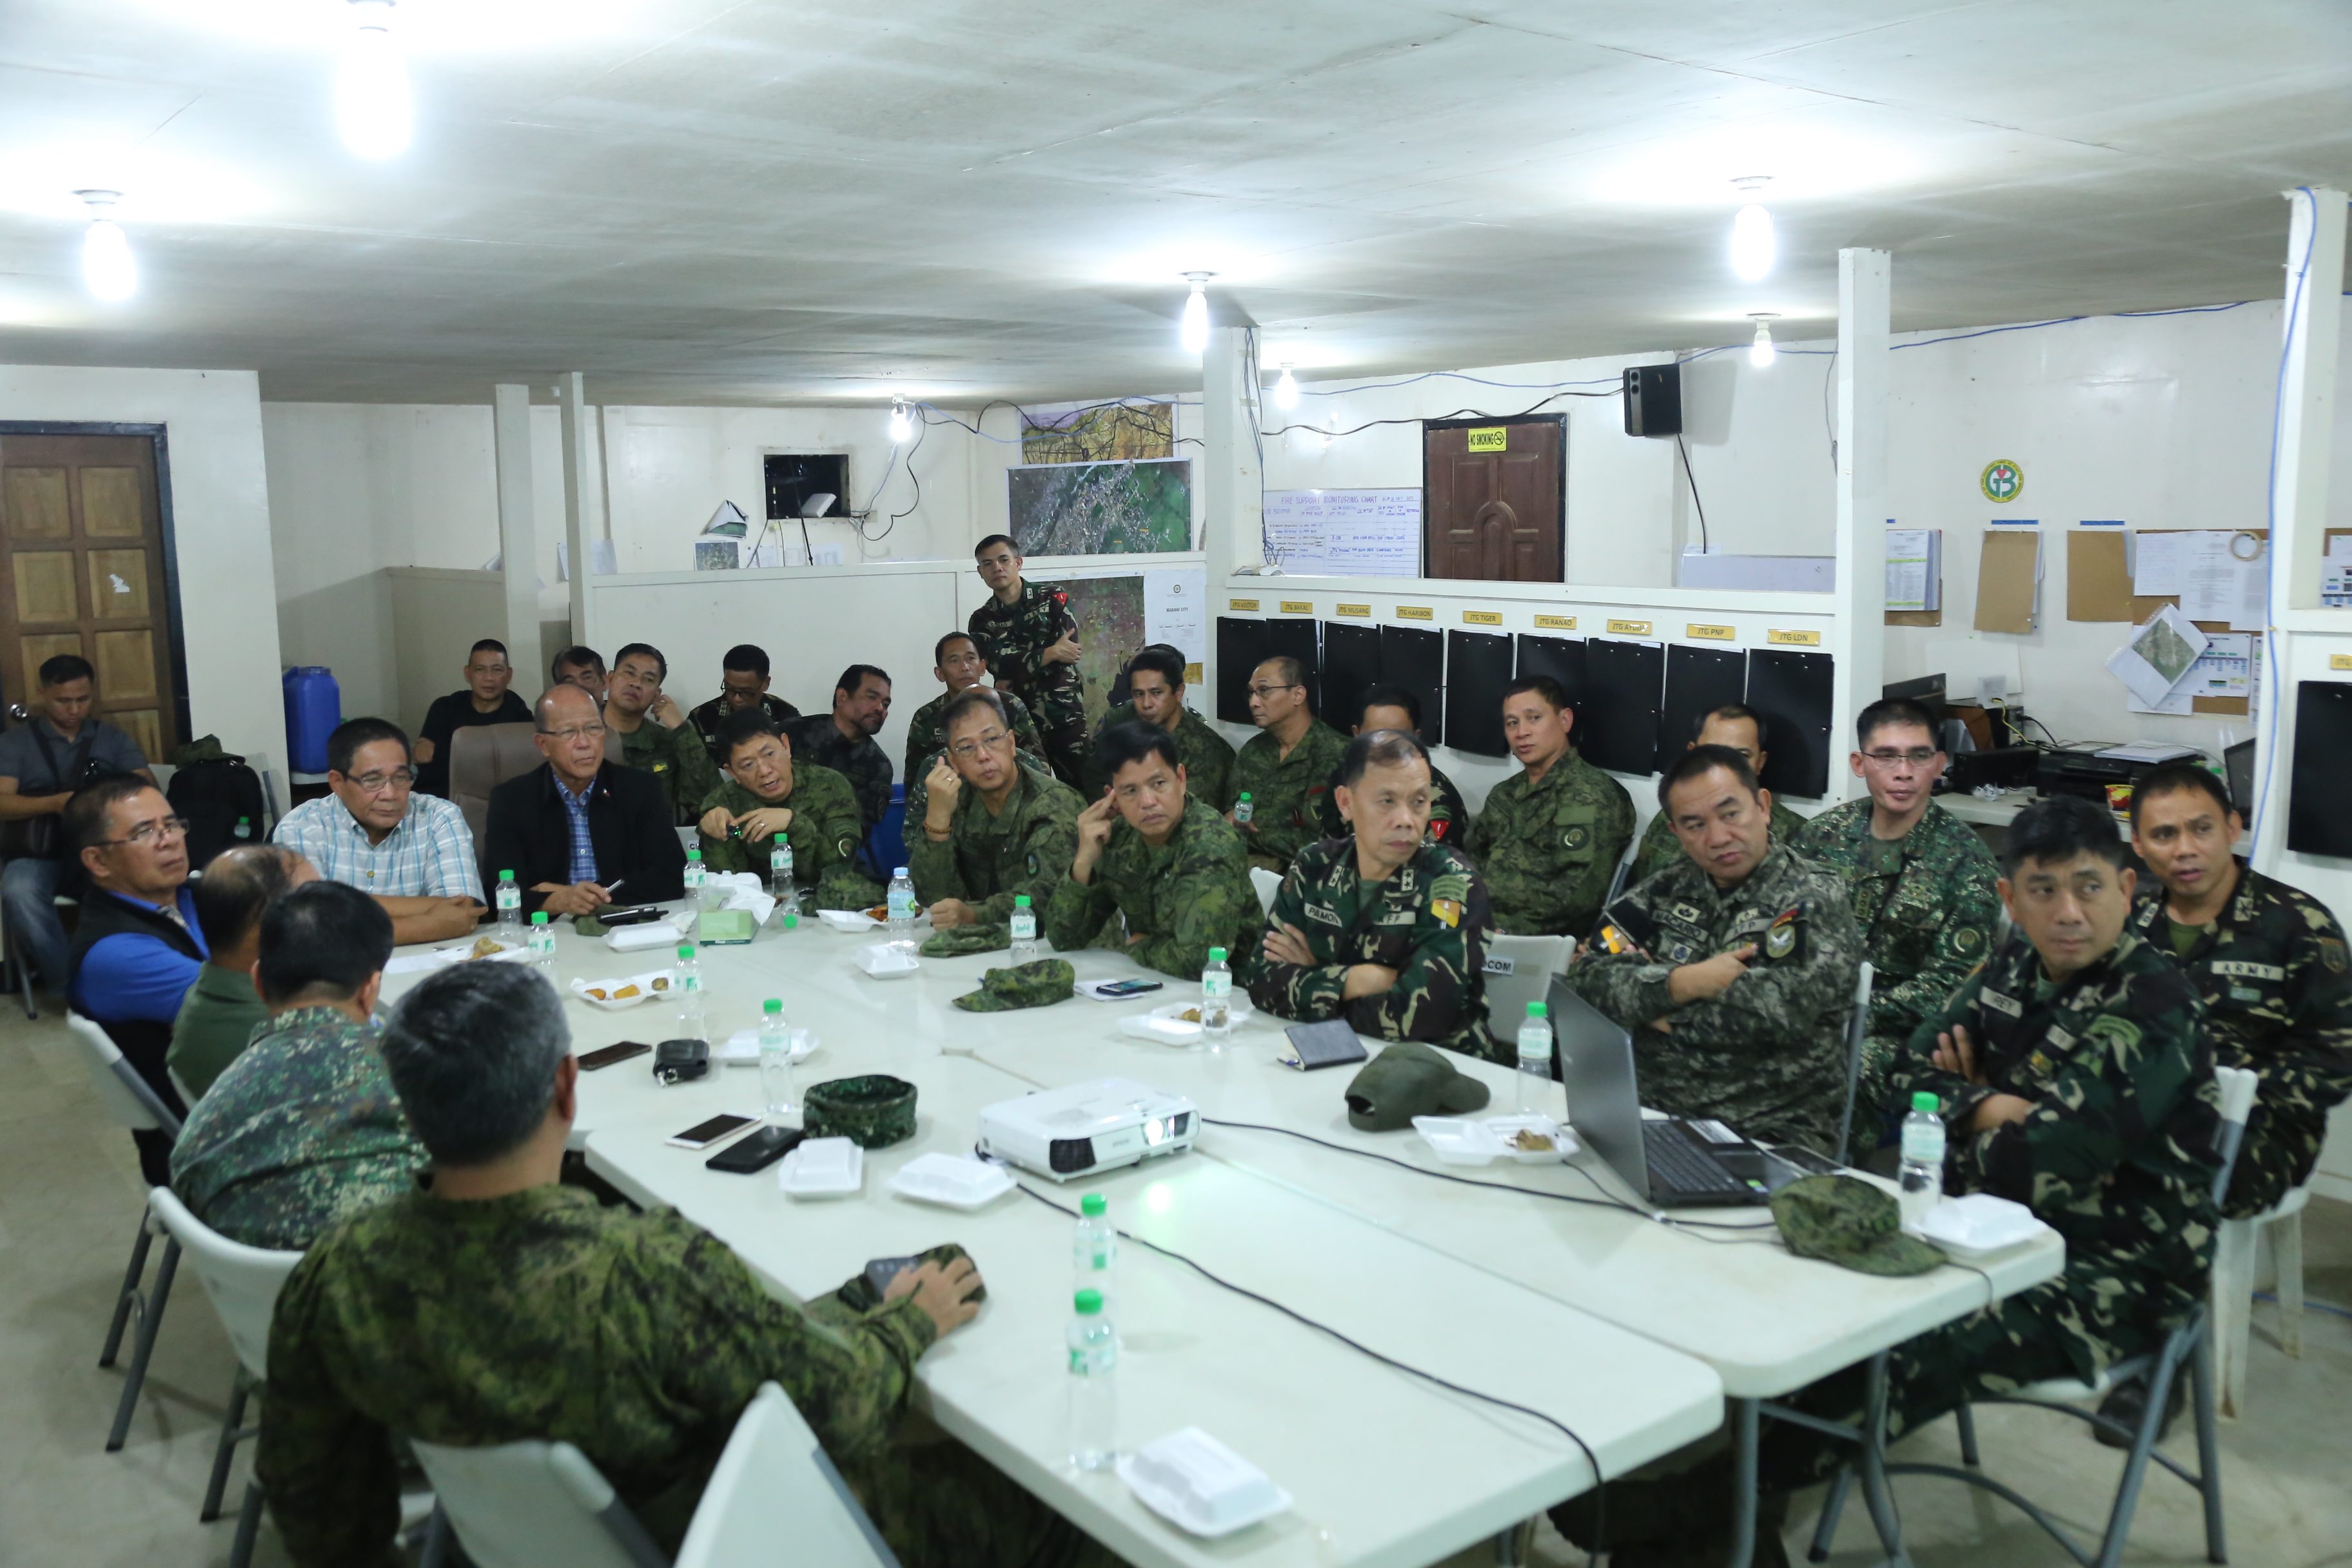 TOP OFFICIALS. National Security Adviser Hermogenes Esperon Jr and Defense Secretary Delfin Lorenzana get a briefing from ground commanders on the 46th day of the Marawi crisis. Photo from AFP 